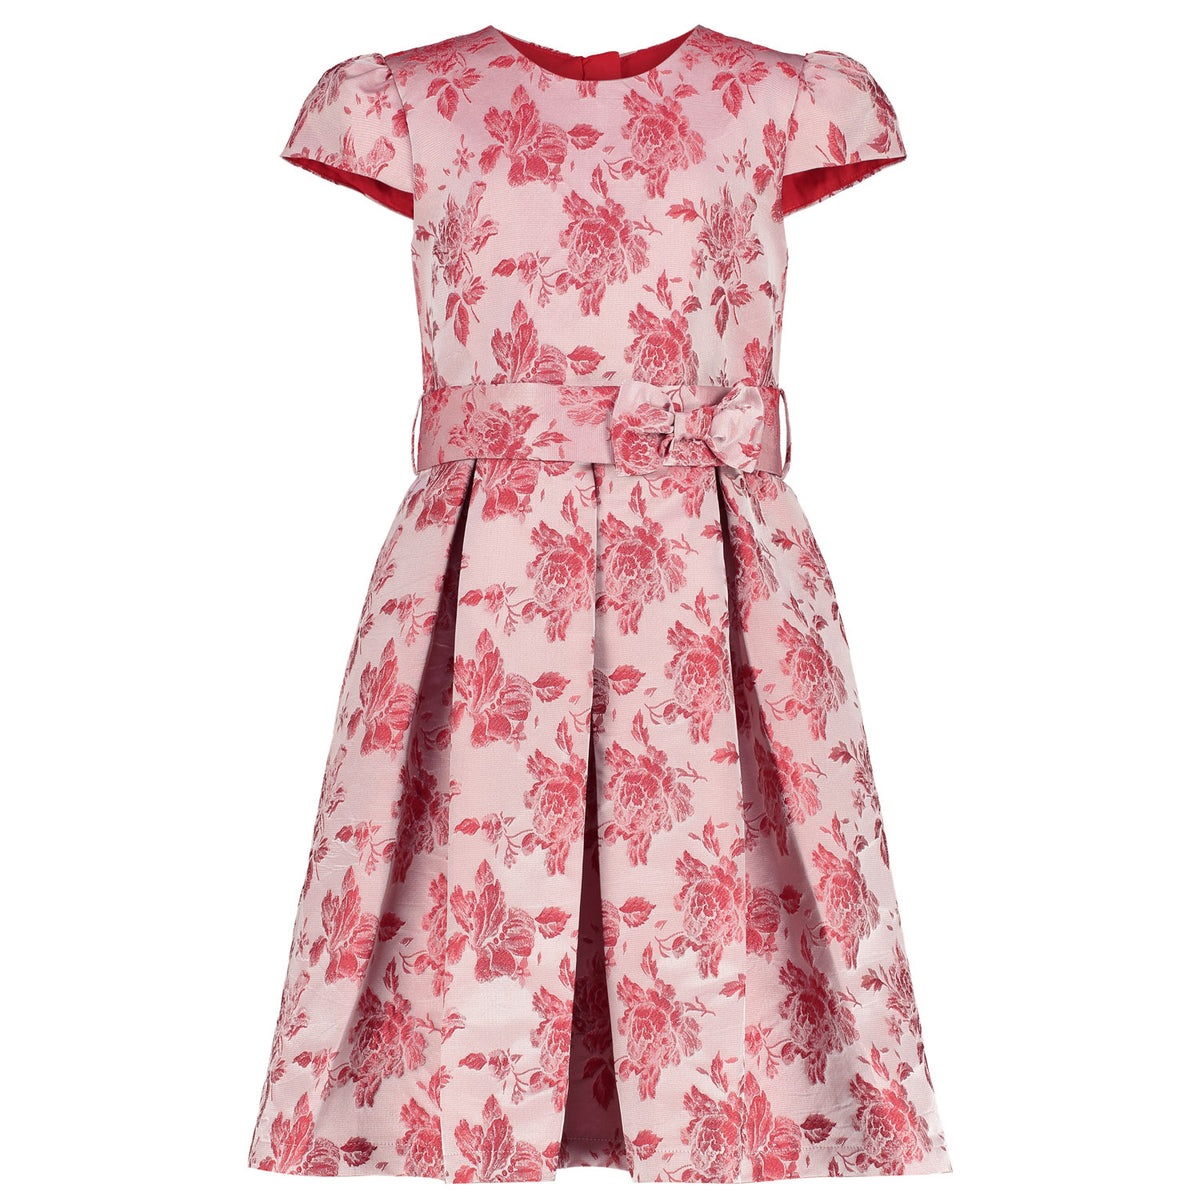 Girls Designer Party Dress Charlotte Red Floral | Holly Hastie London